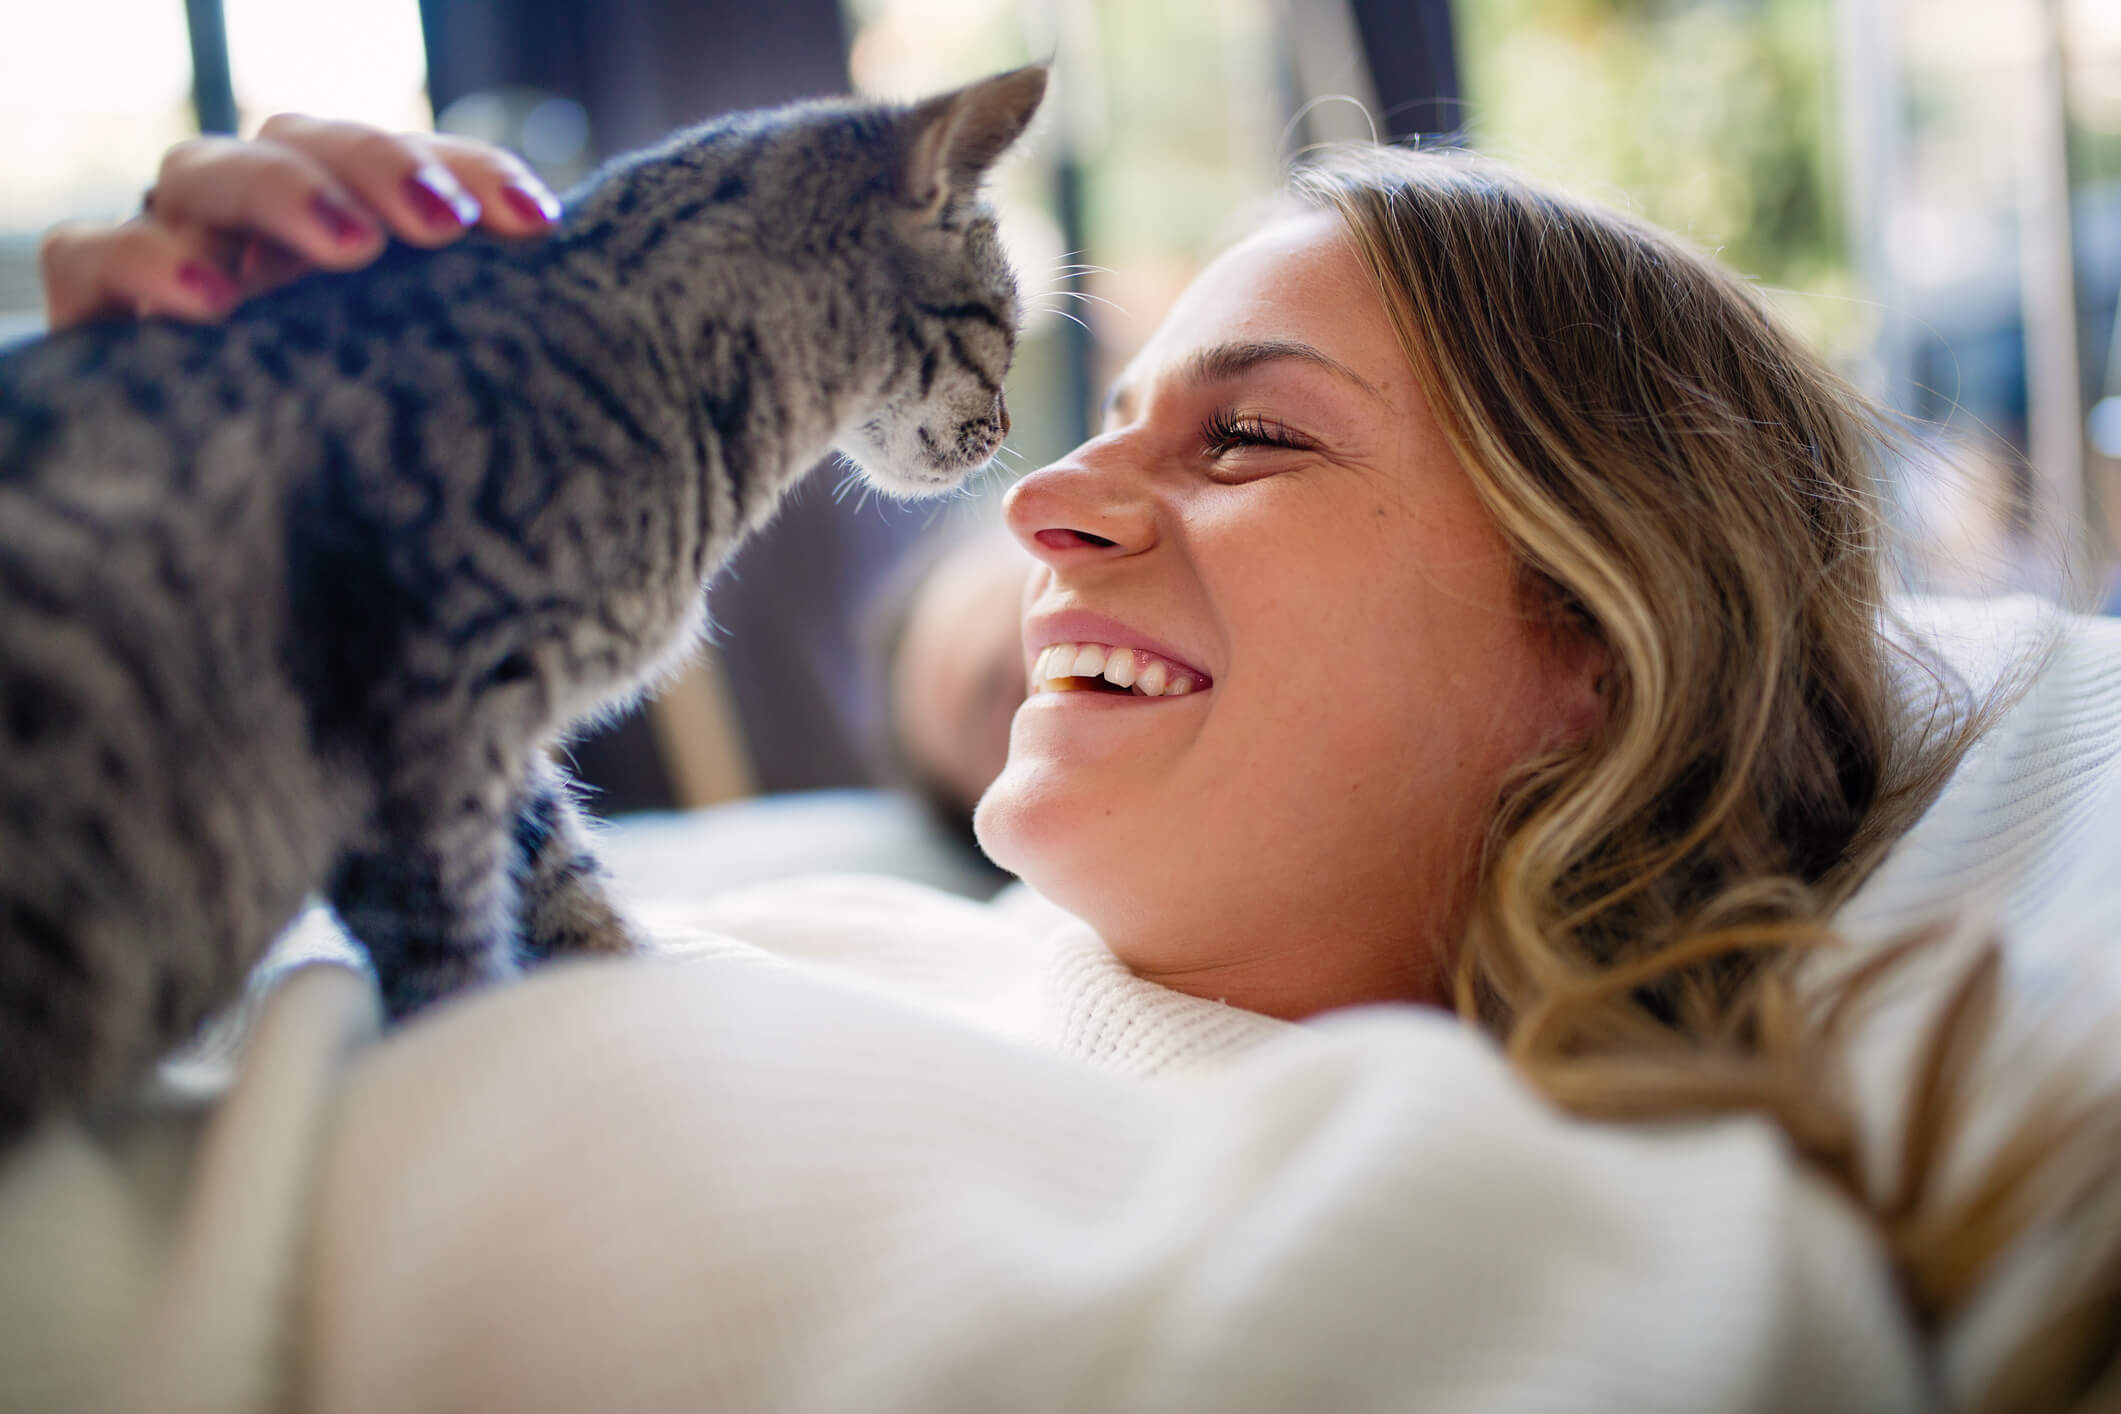 A happy pet owner smiles are her kitten